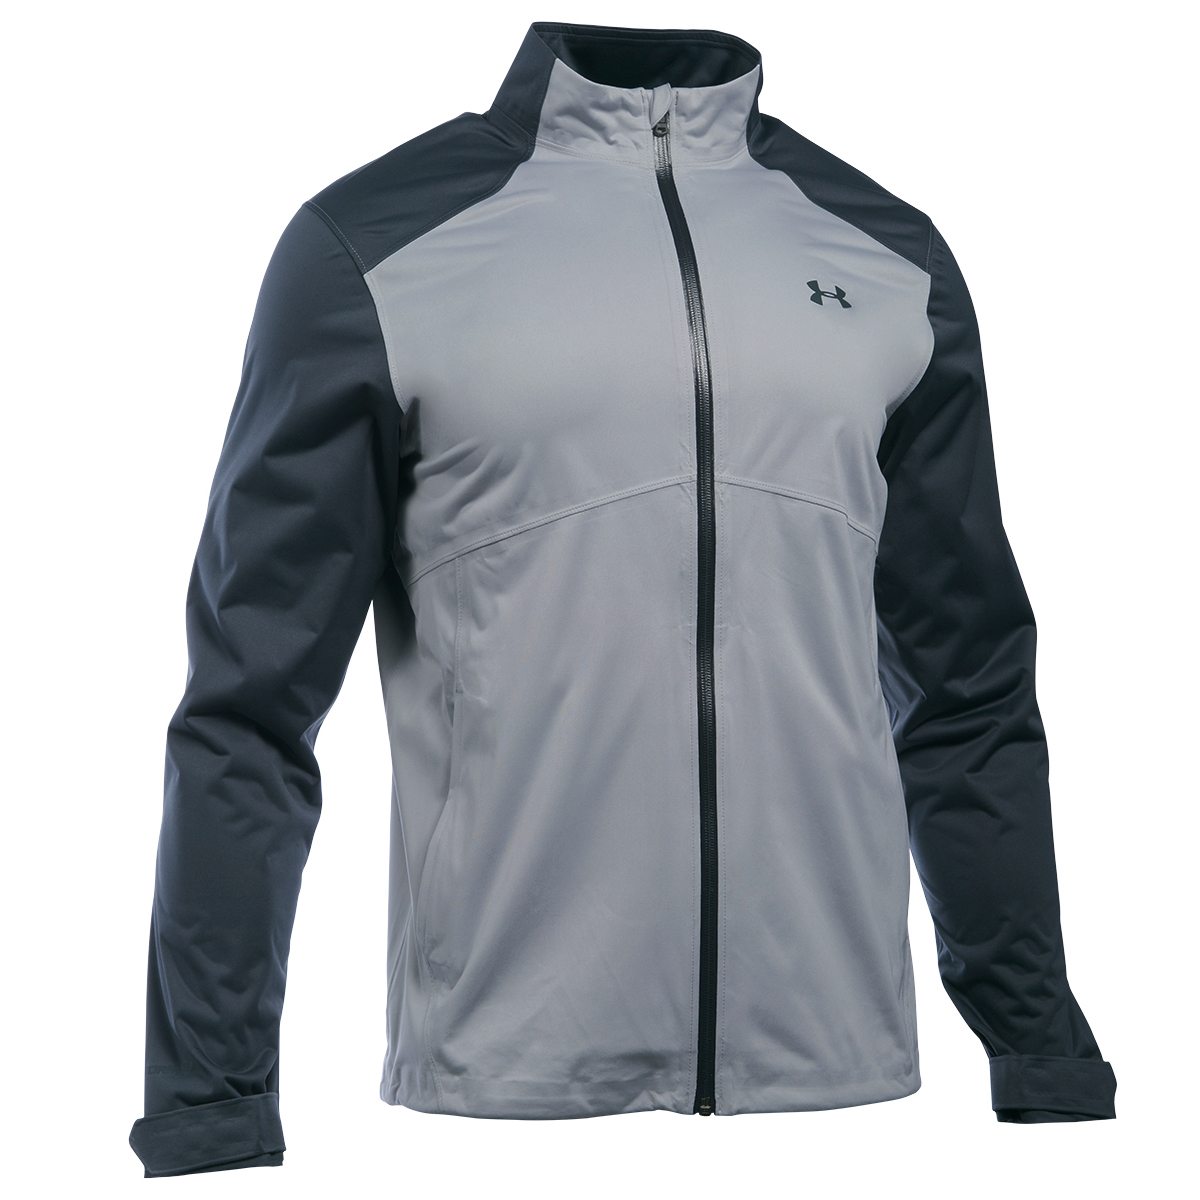 under armour storm 3 waterproof jacket review